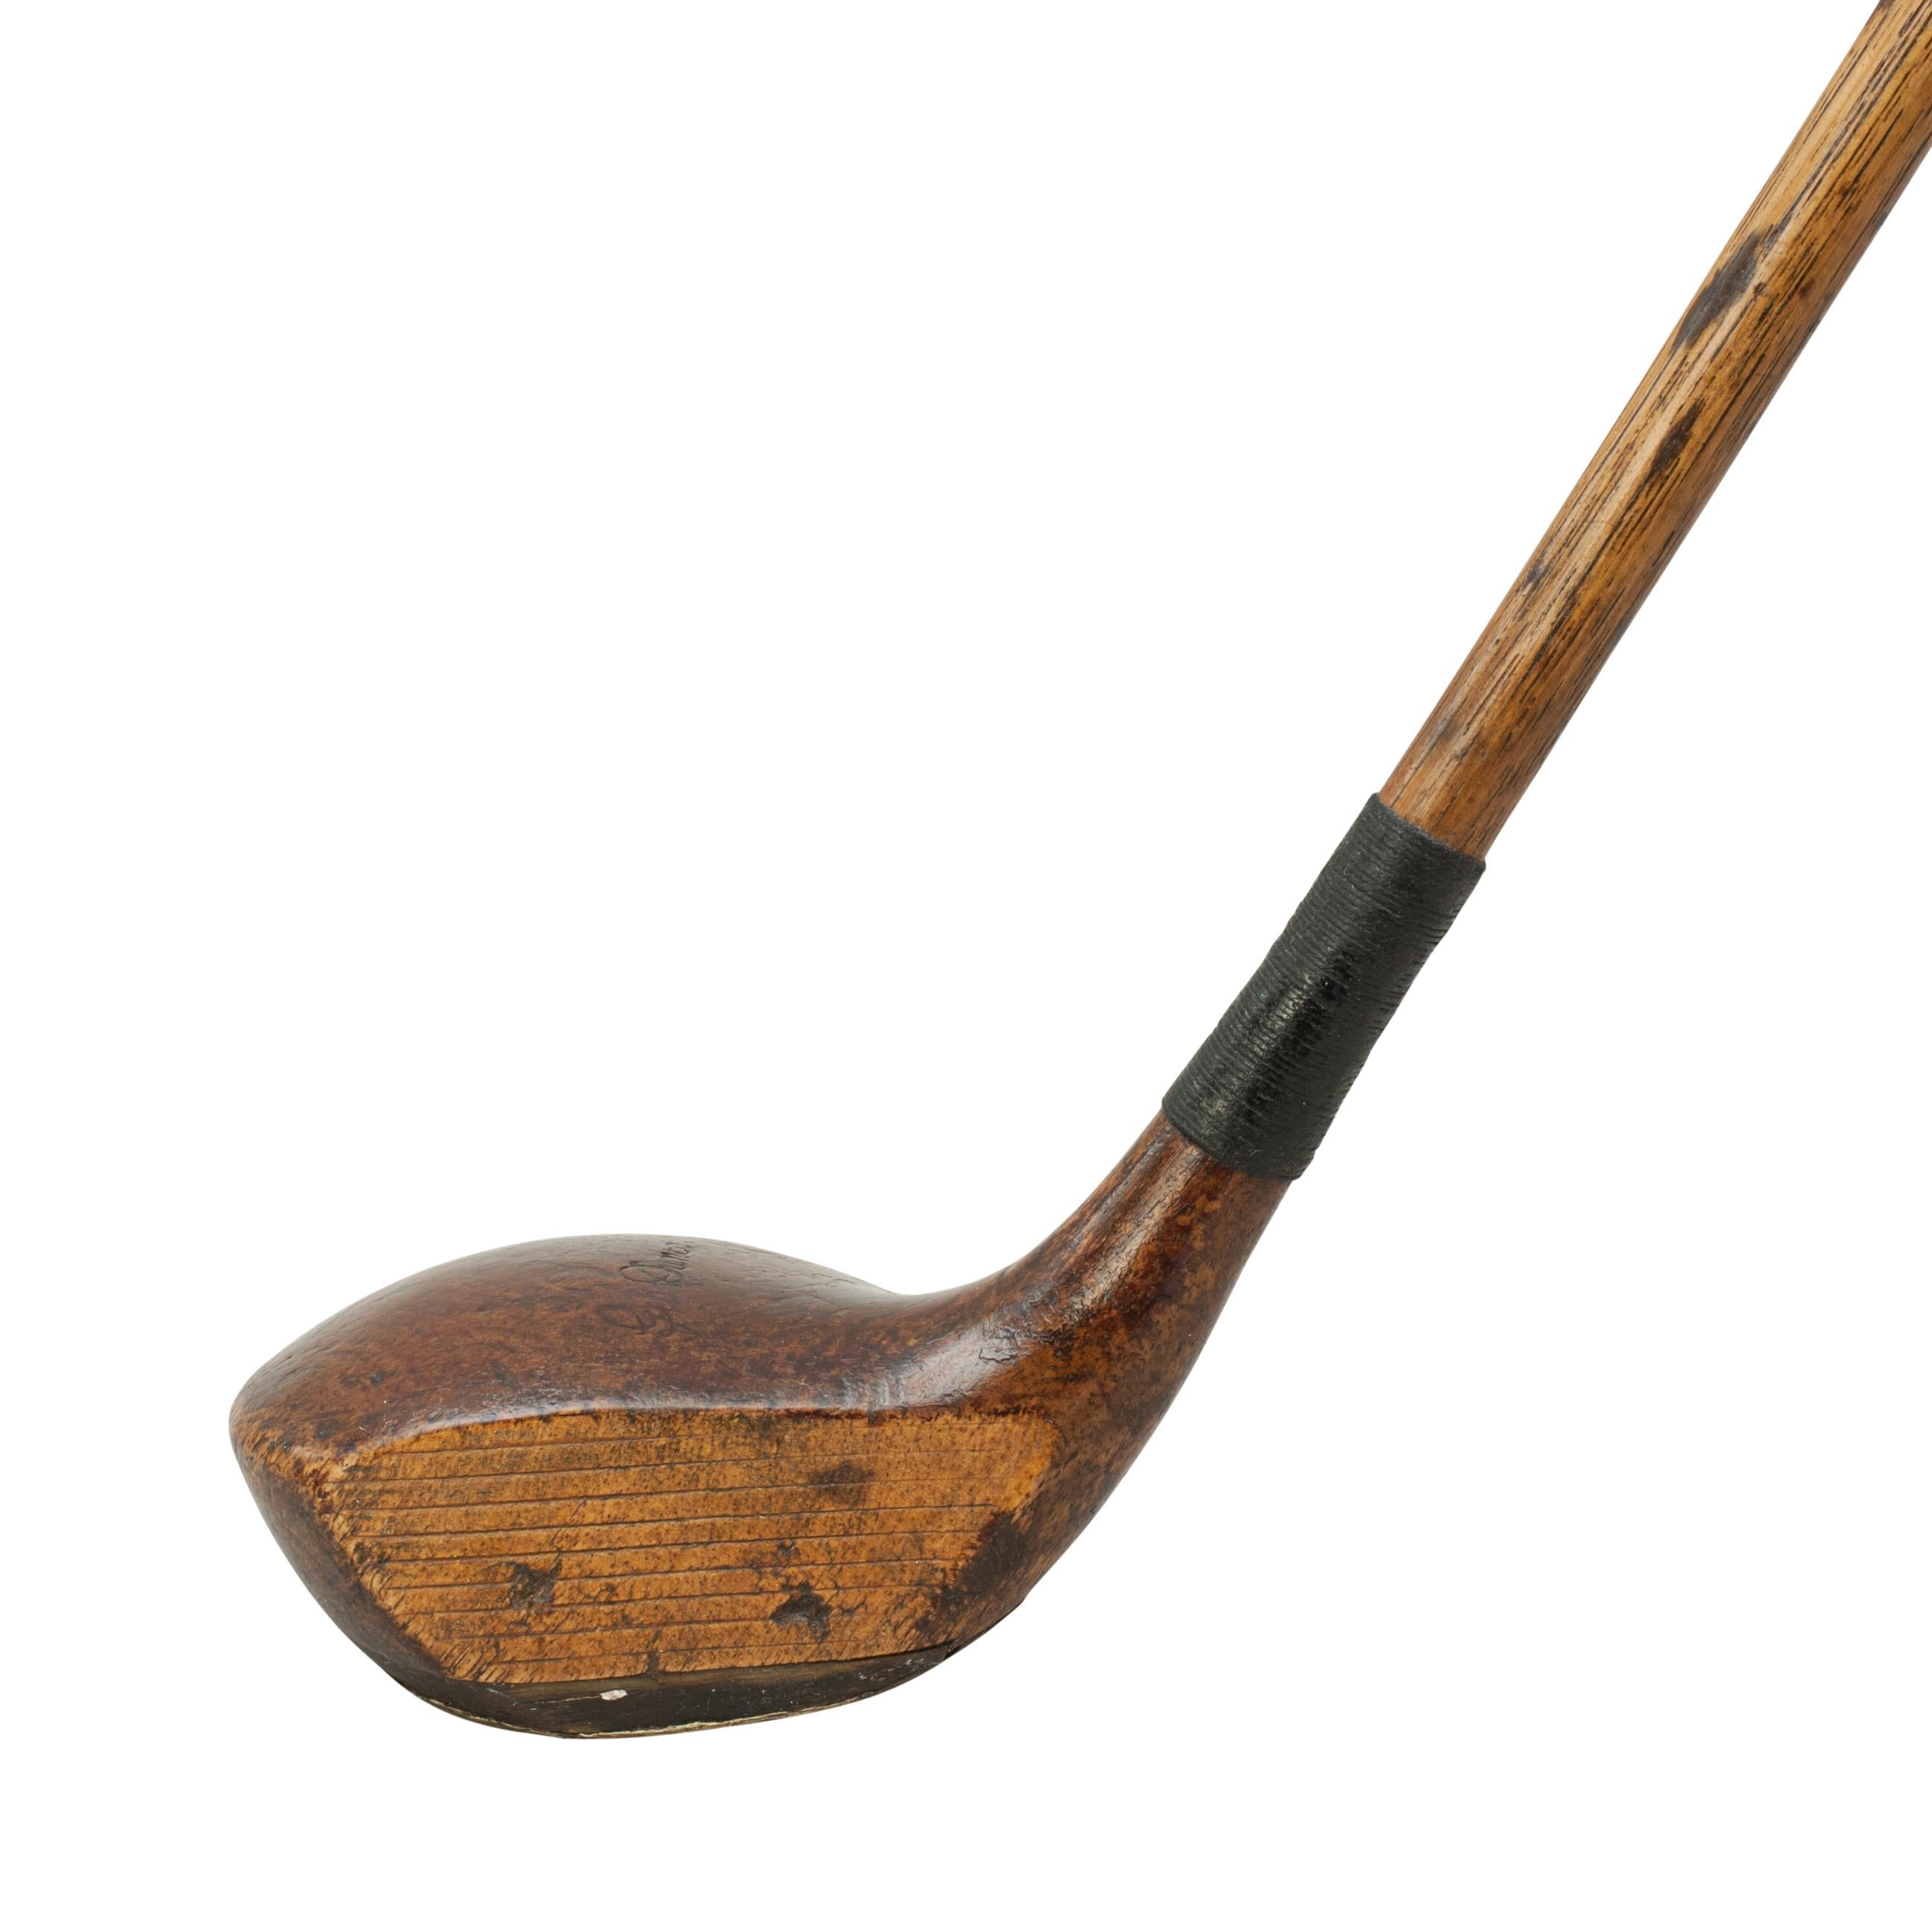 Golf Club, Hickory Gibson Brassie, George Duncan.
A good persimmon wood brassie by Gibson of Kinghorn, Fife. The club has a hickory shaft with a faint Gibson 'Star' stamped into it with a suede leather grip. The head is marked with 'Geo Duncan'